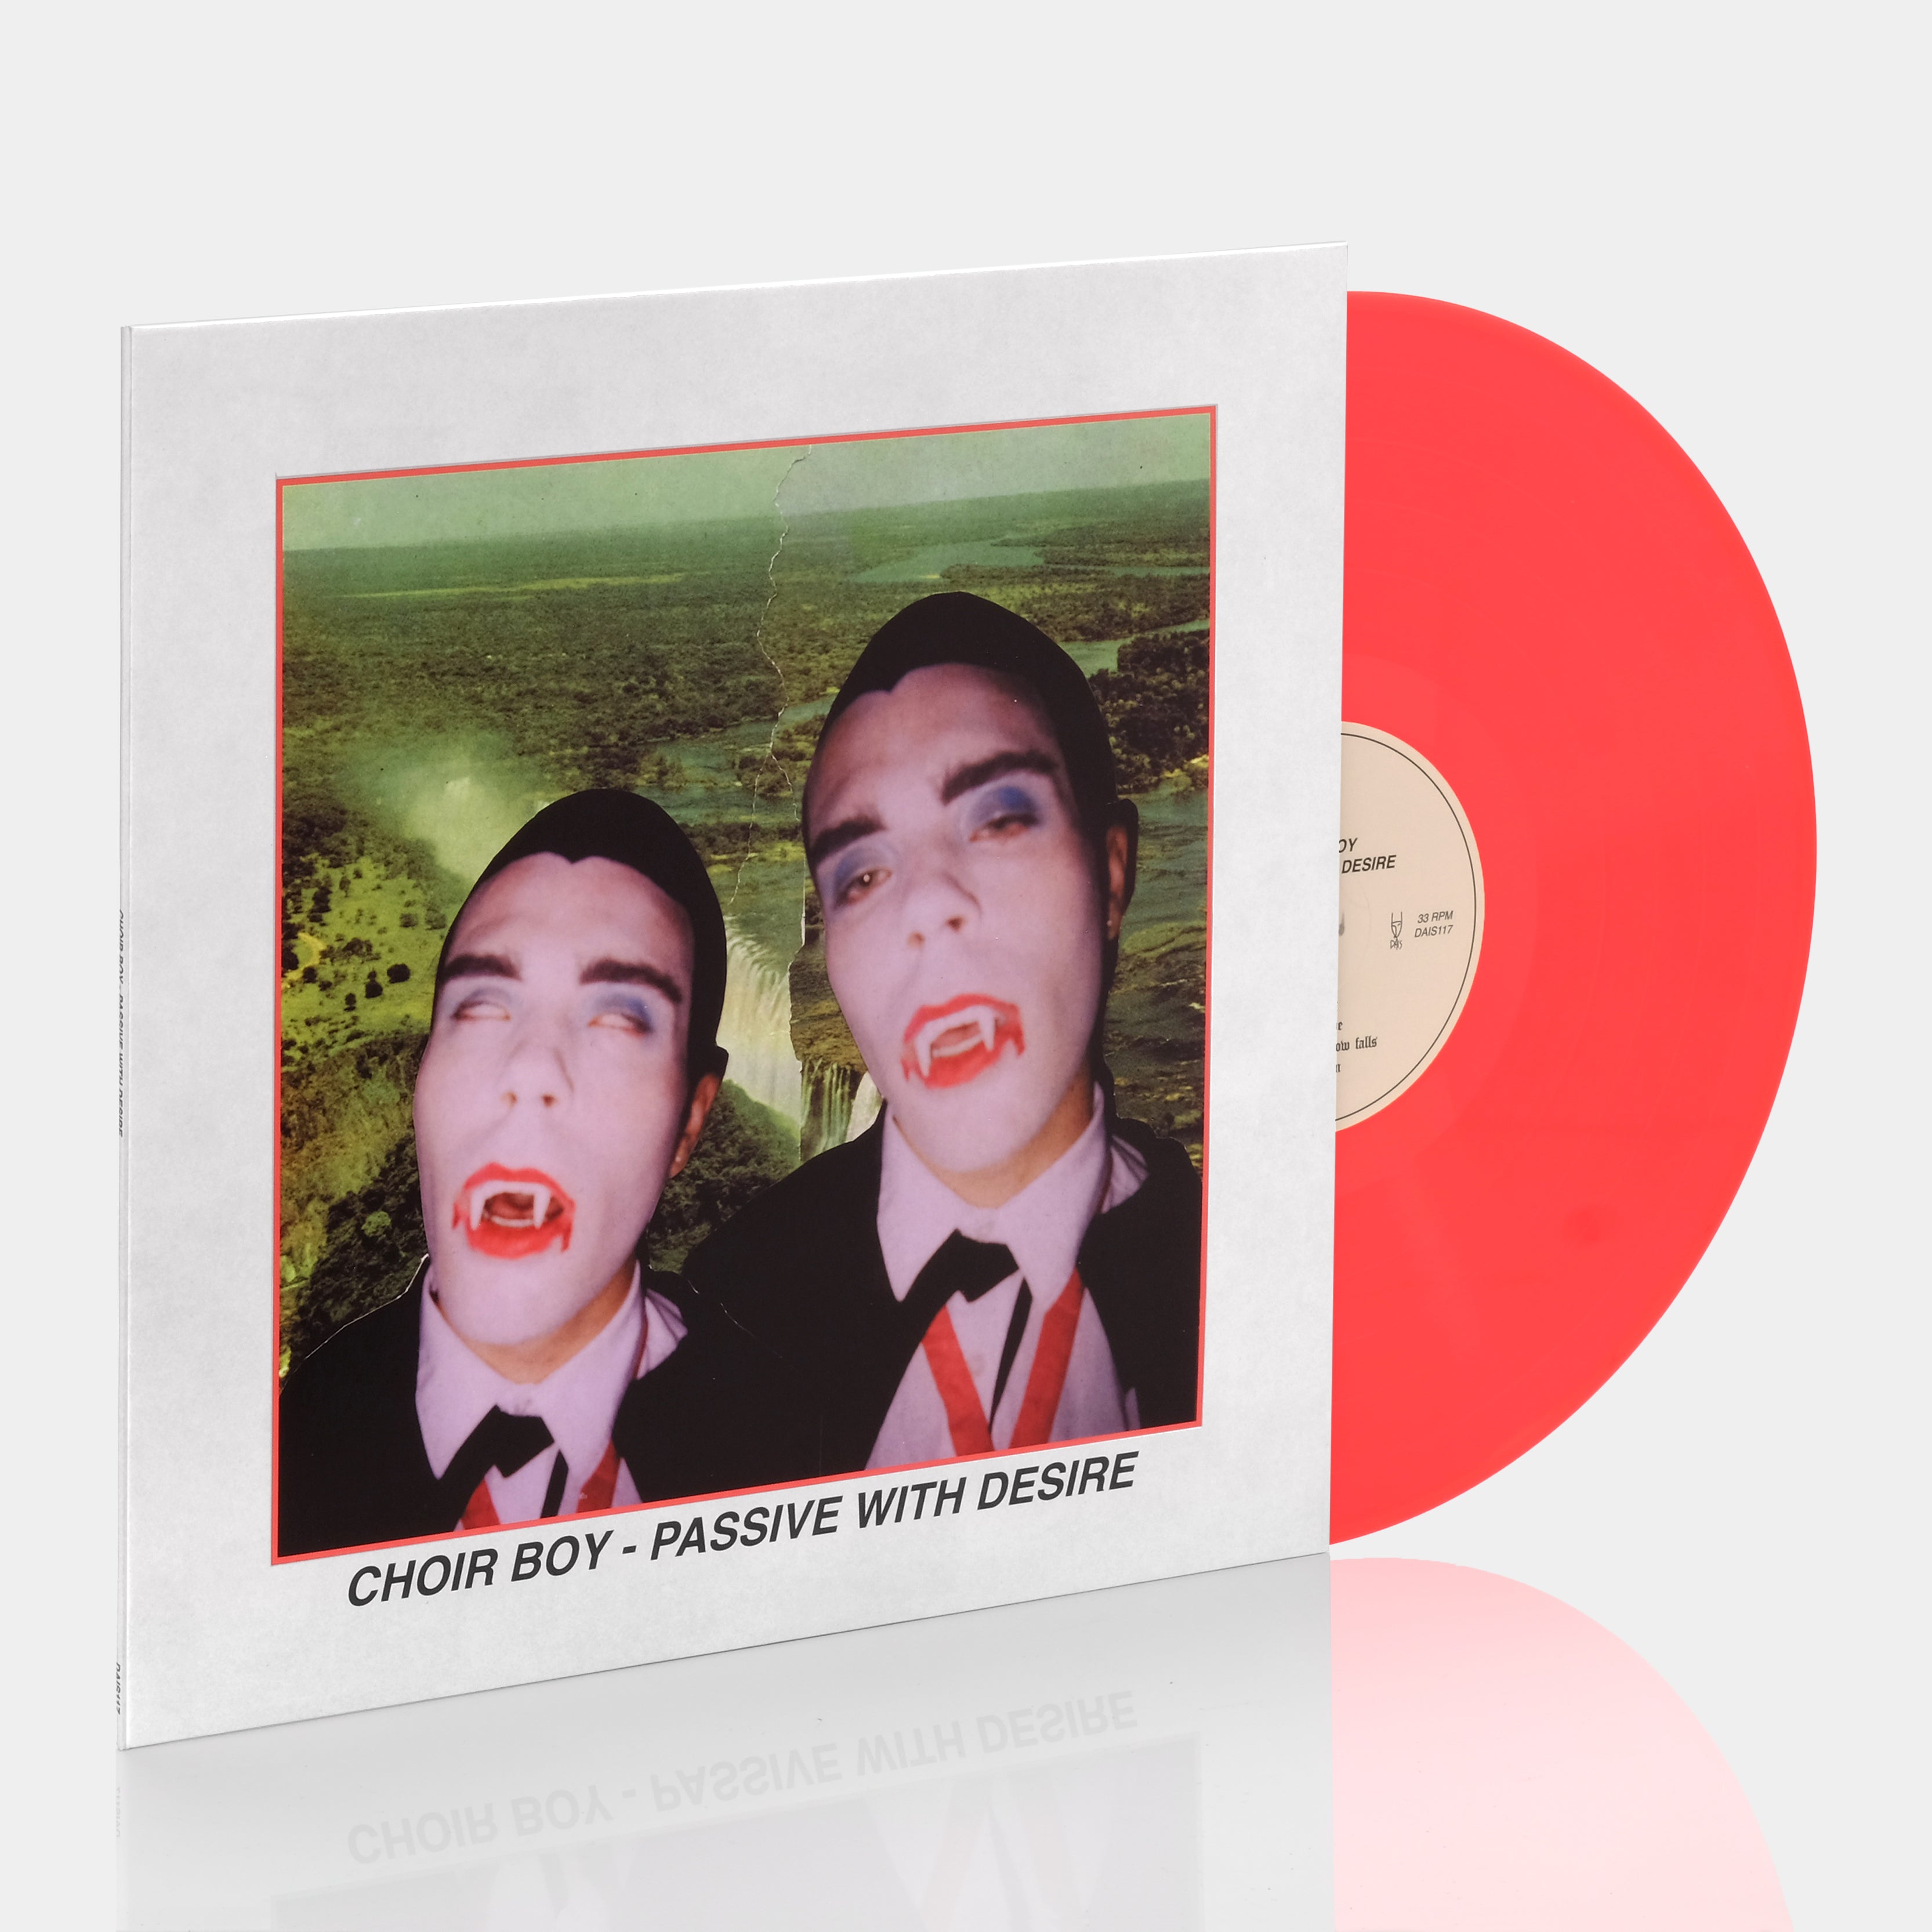 Choir Boy - Passive With Desire Limited Edition LP Neon Pink Vinyl Record